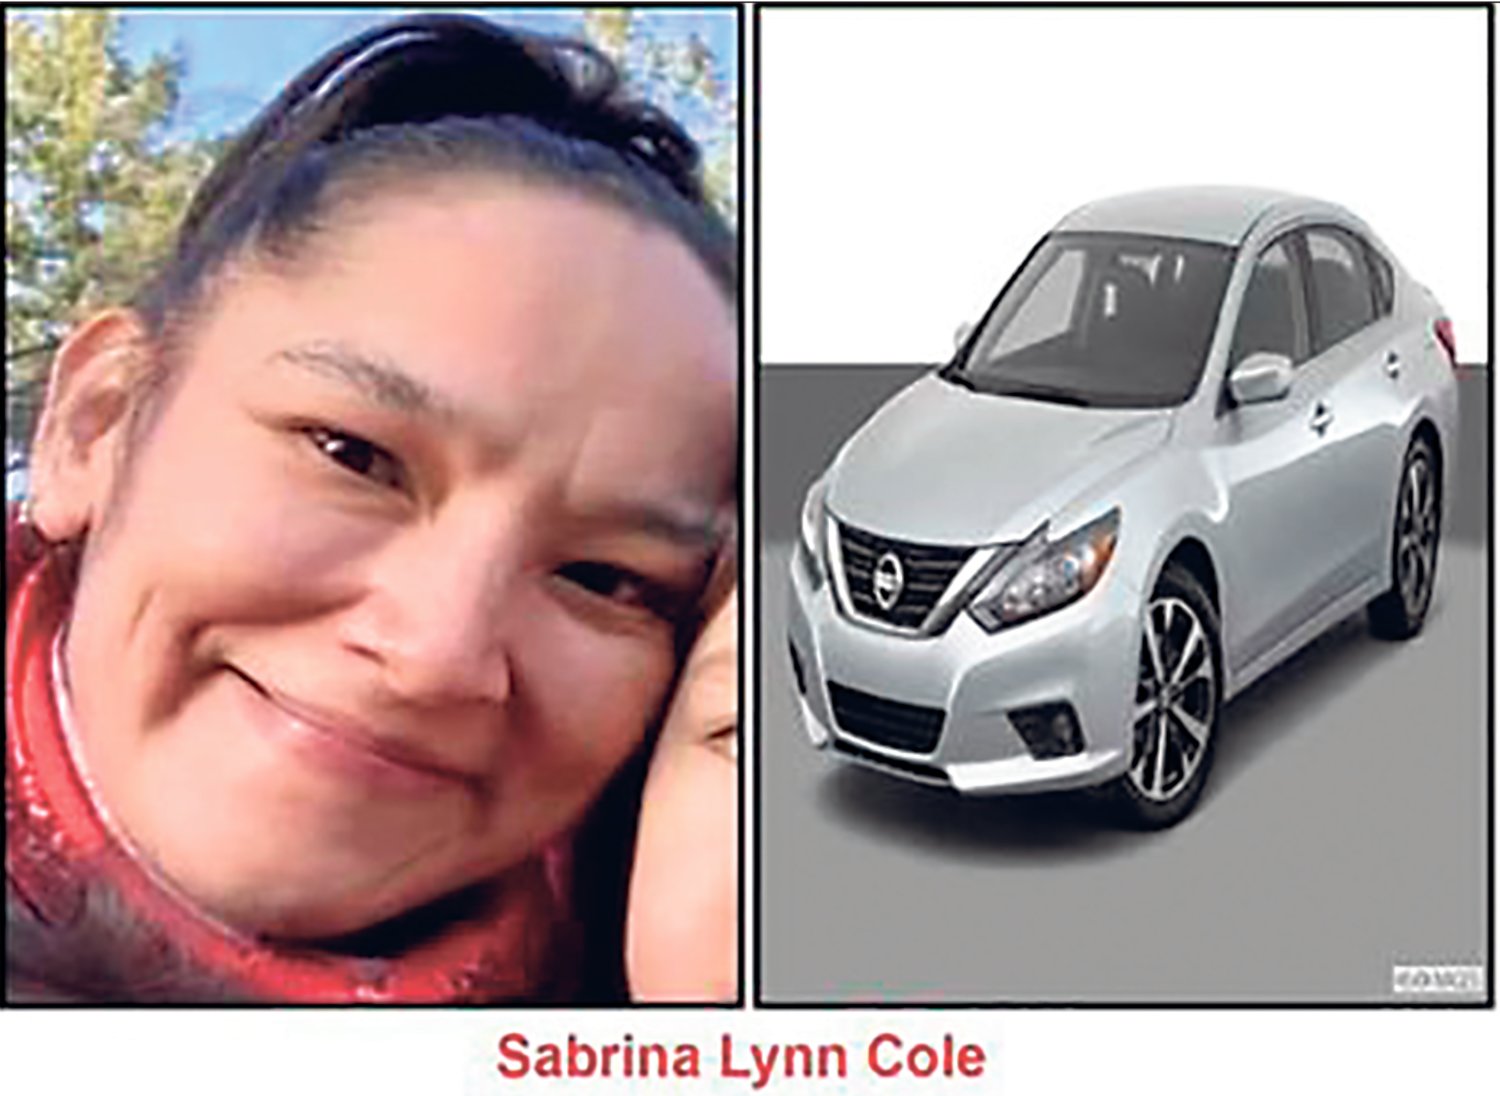 The victim, 45-year-old Sabrina Lynn Cole, had been missing since March 20. 